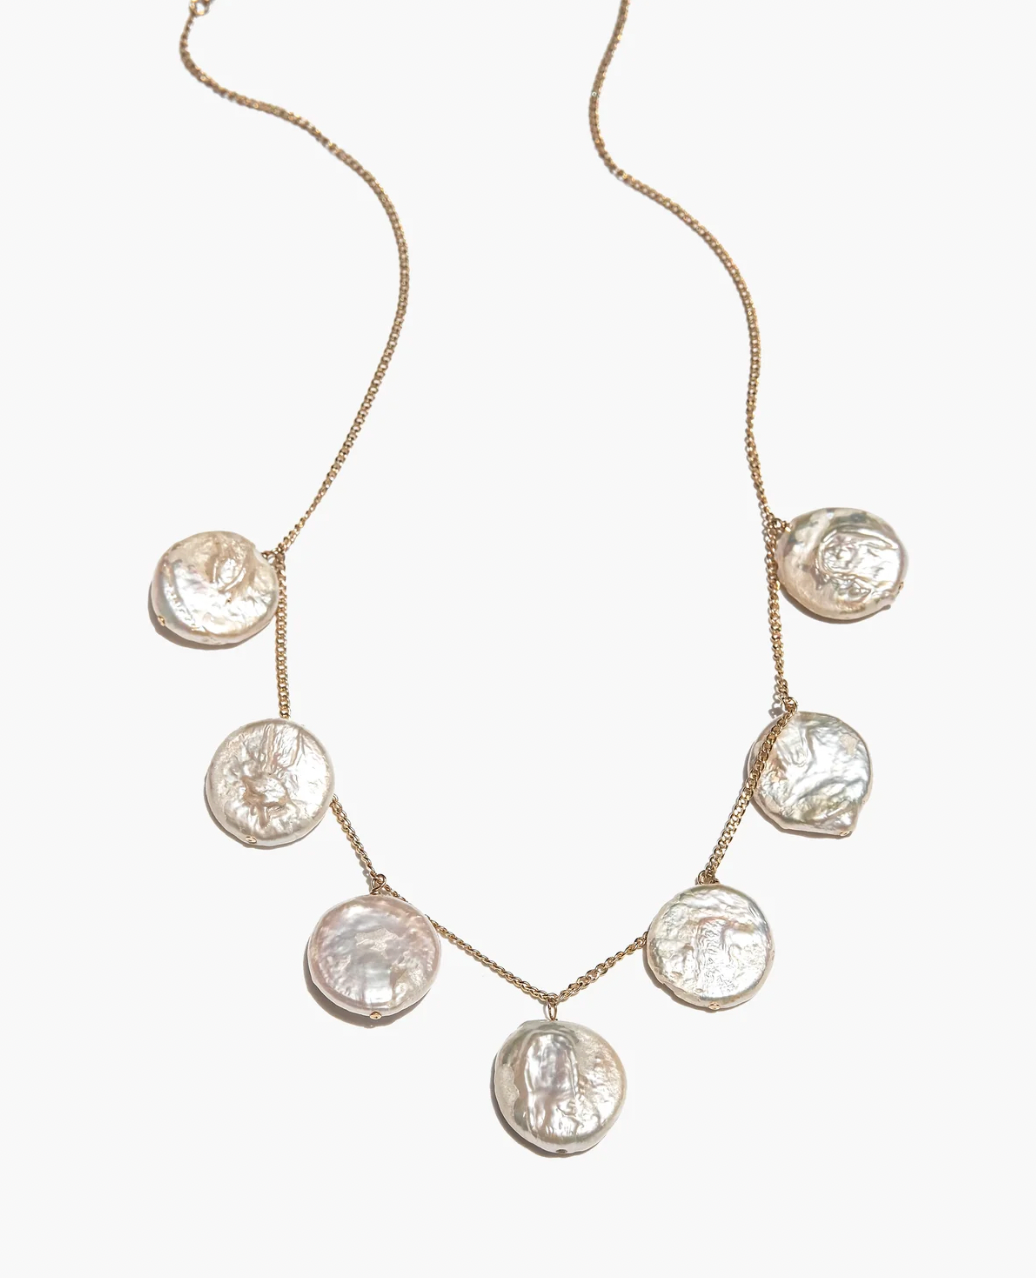 Triana Necklace by Muns